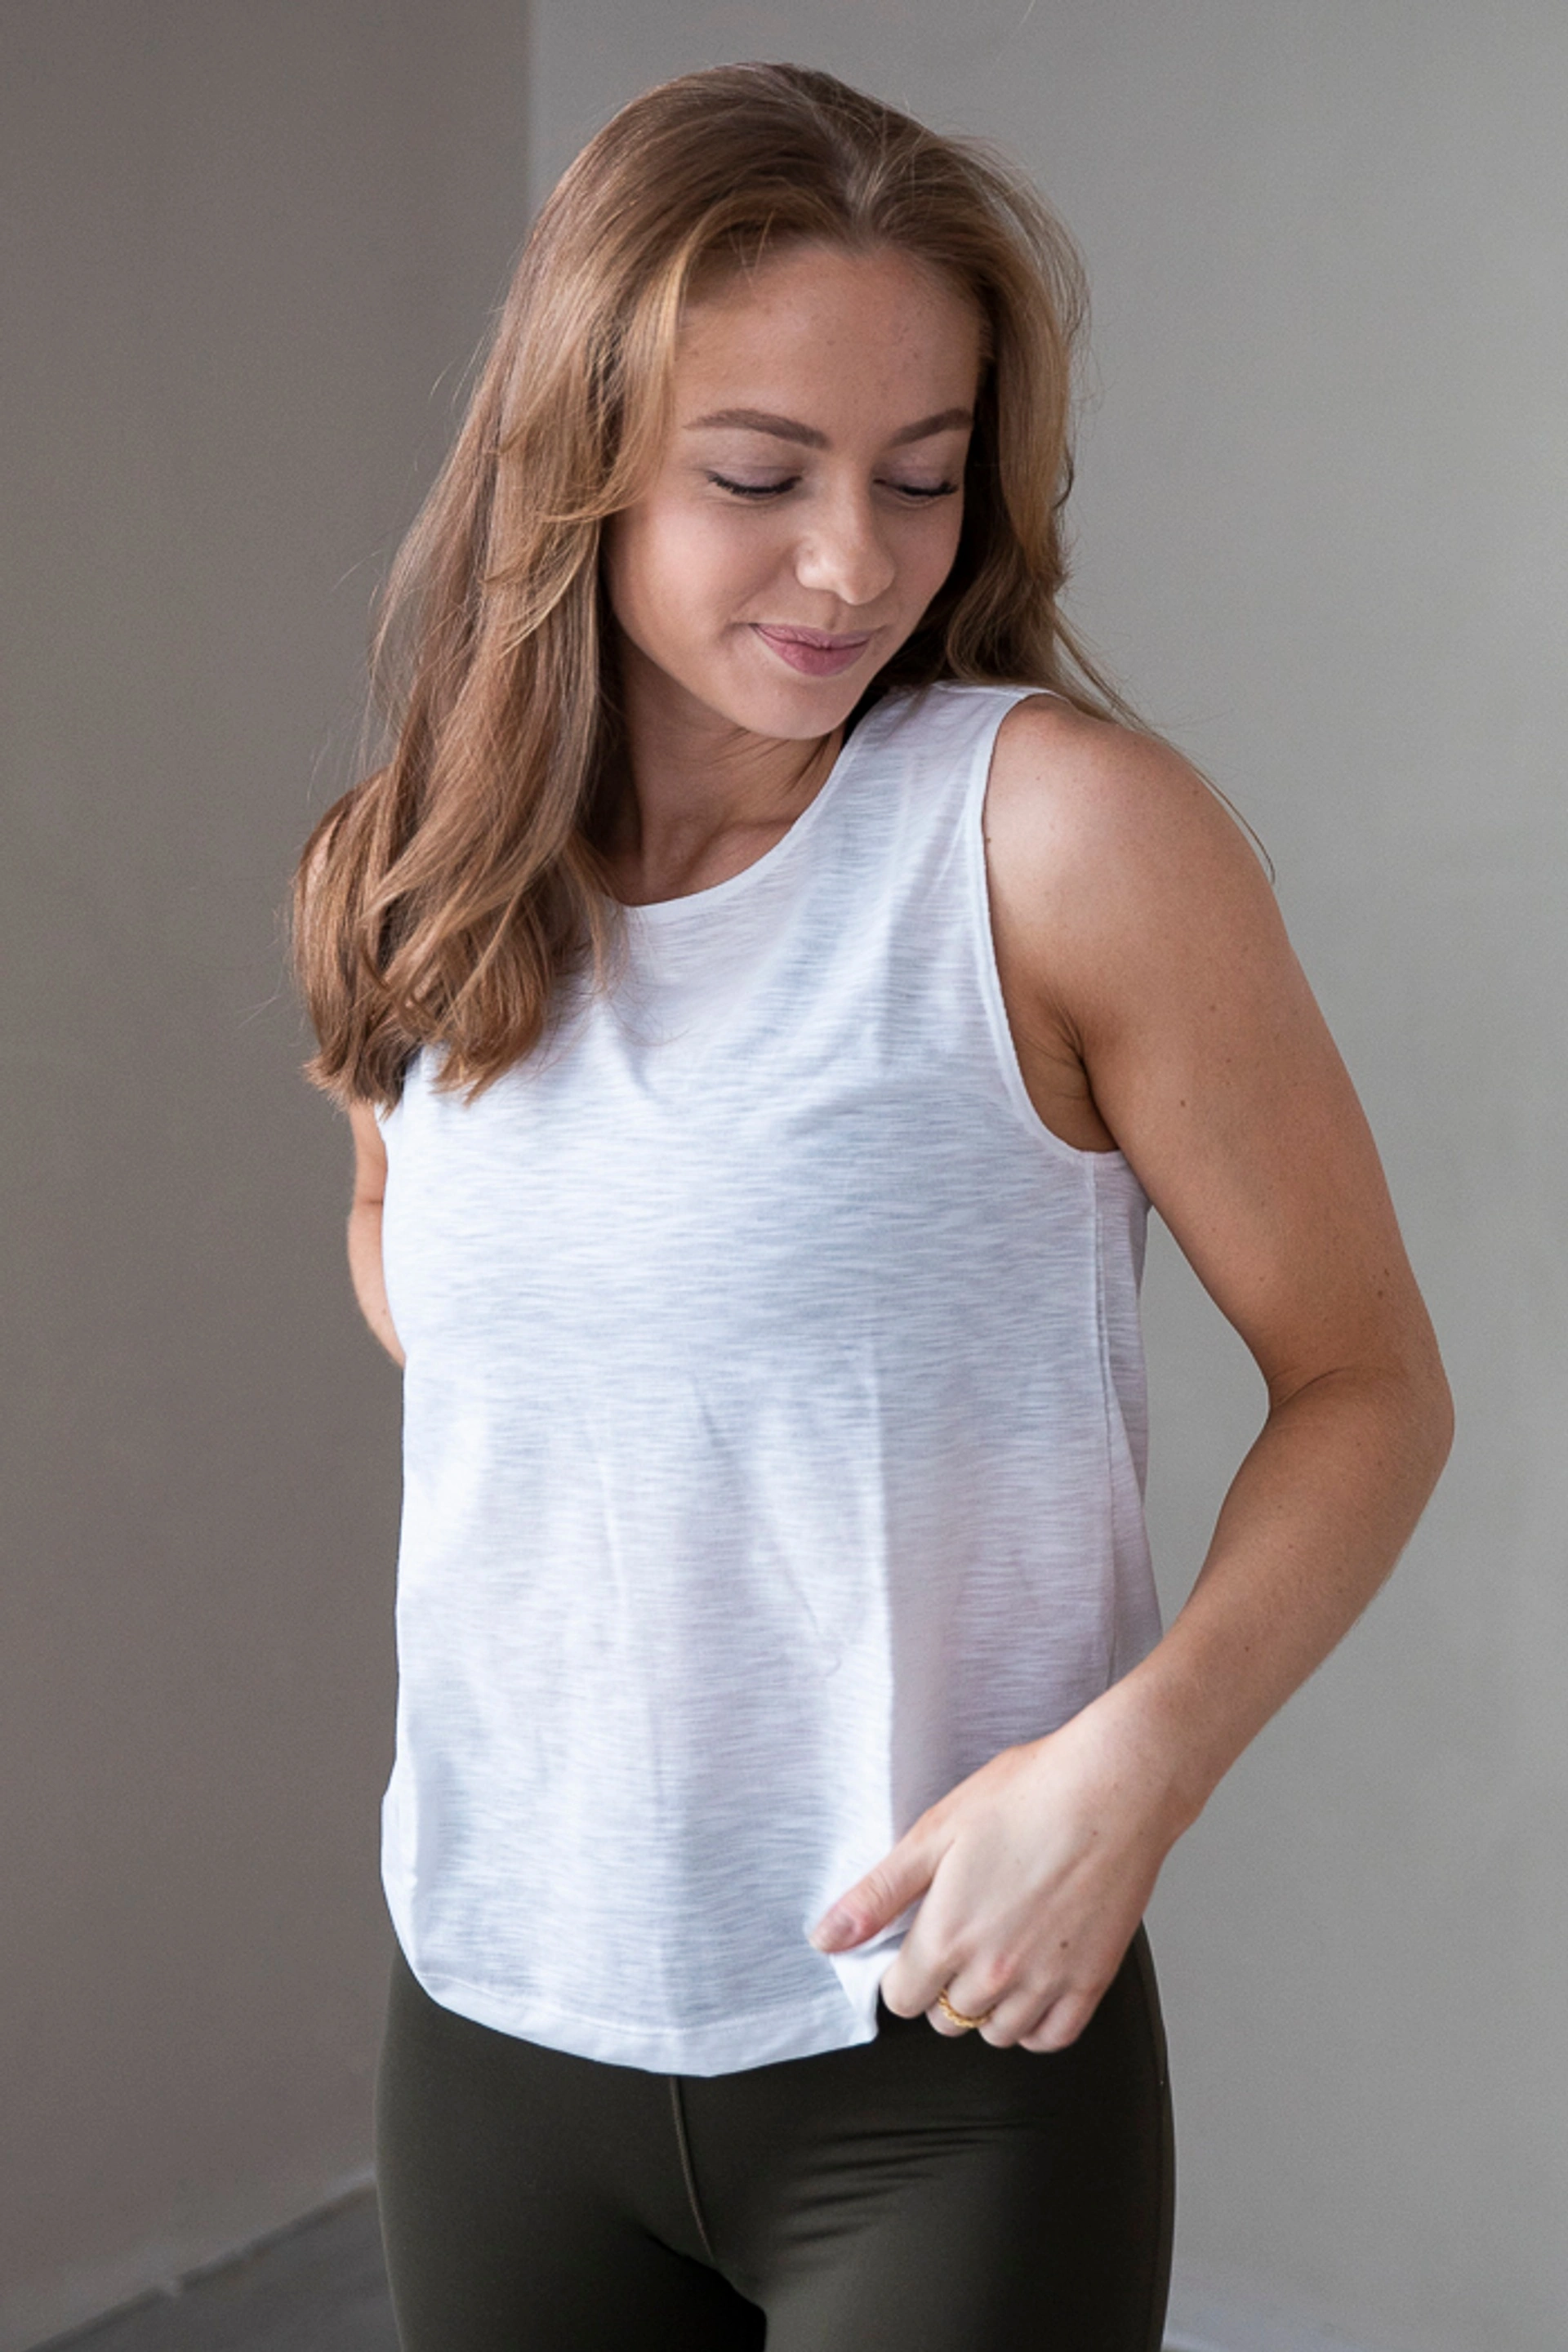 Shop the look - Texture Muscle Tank